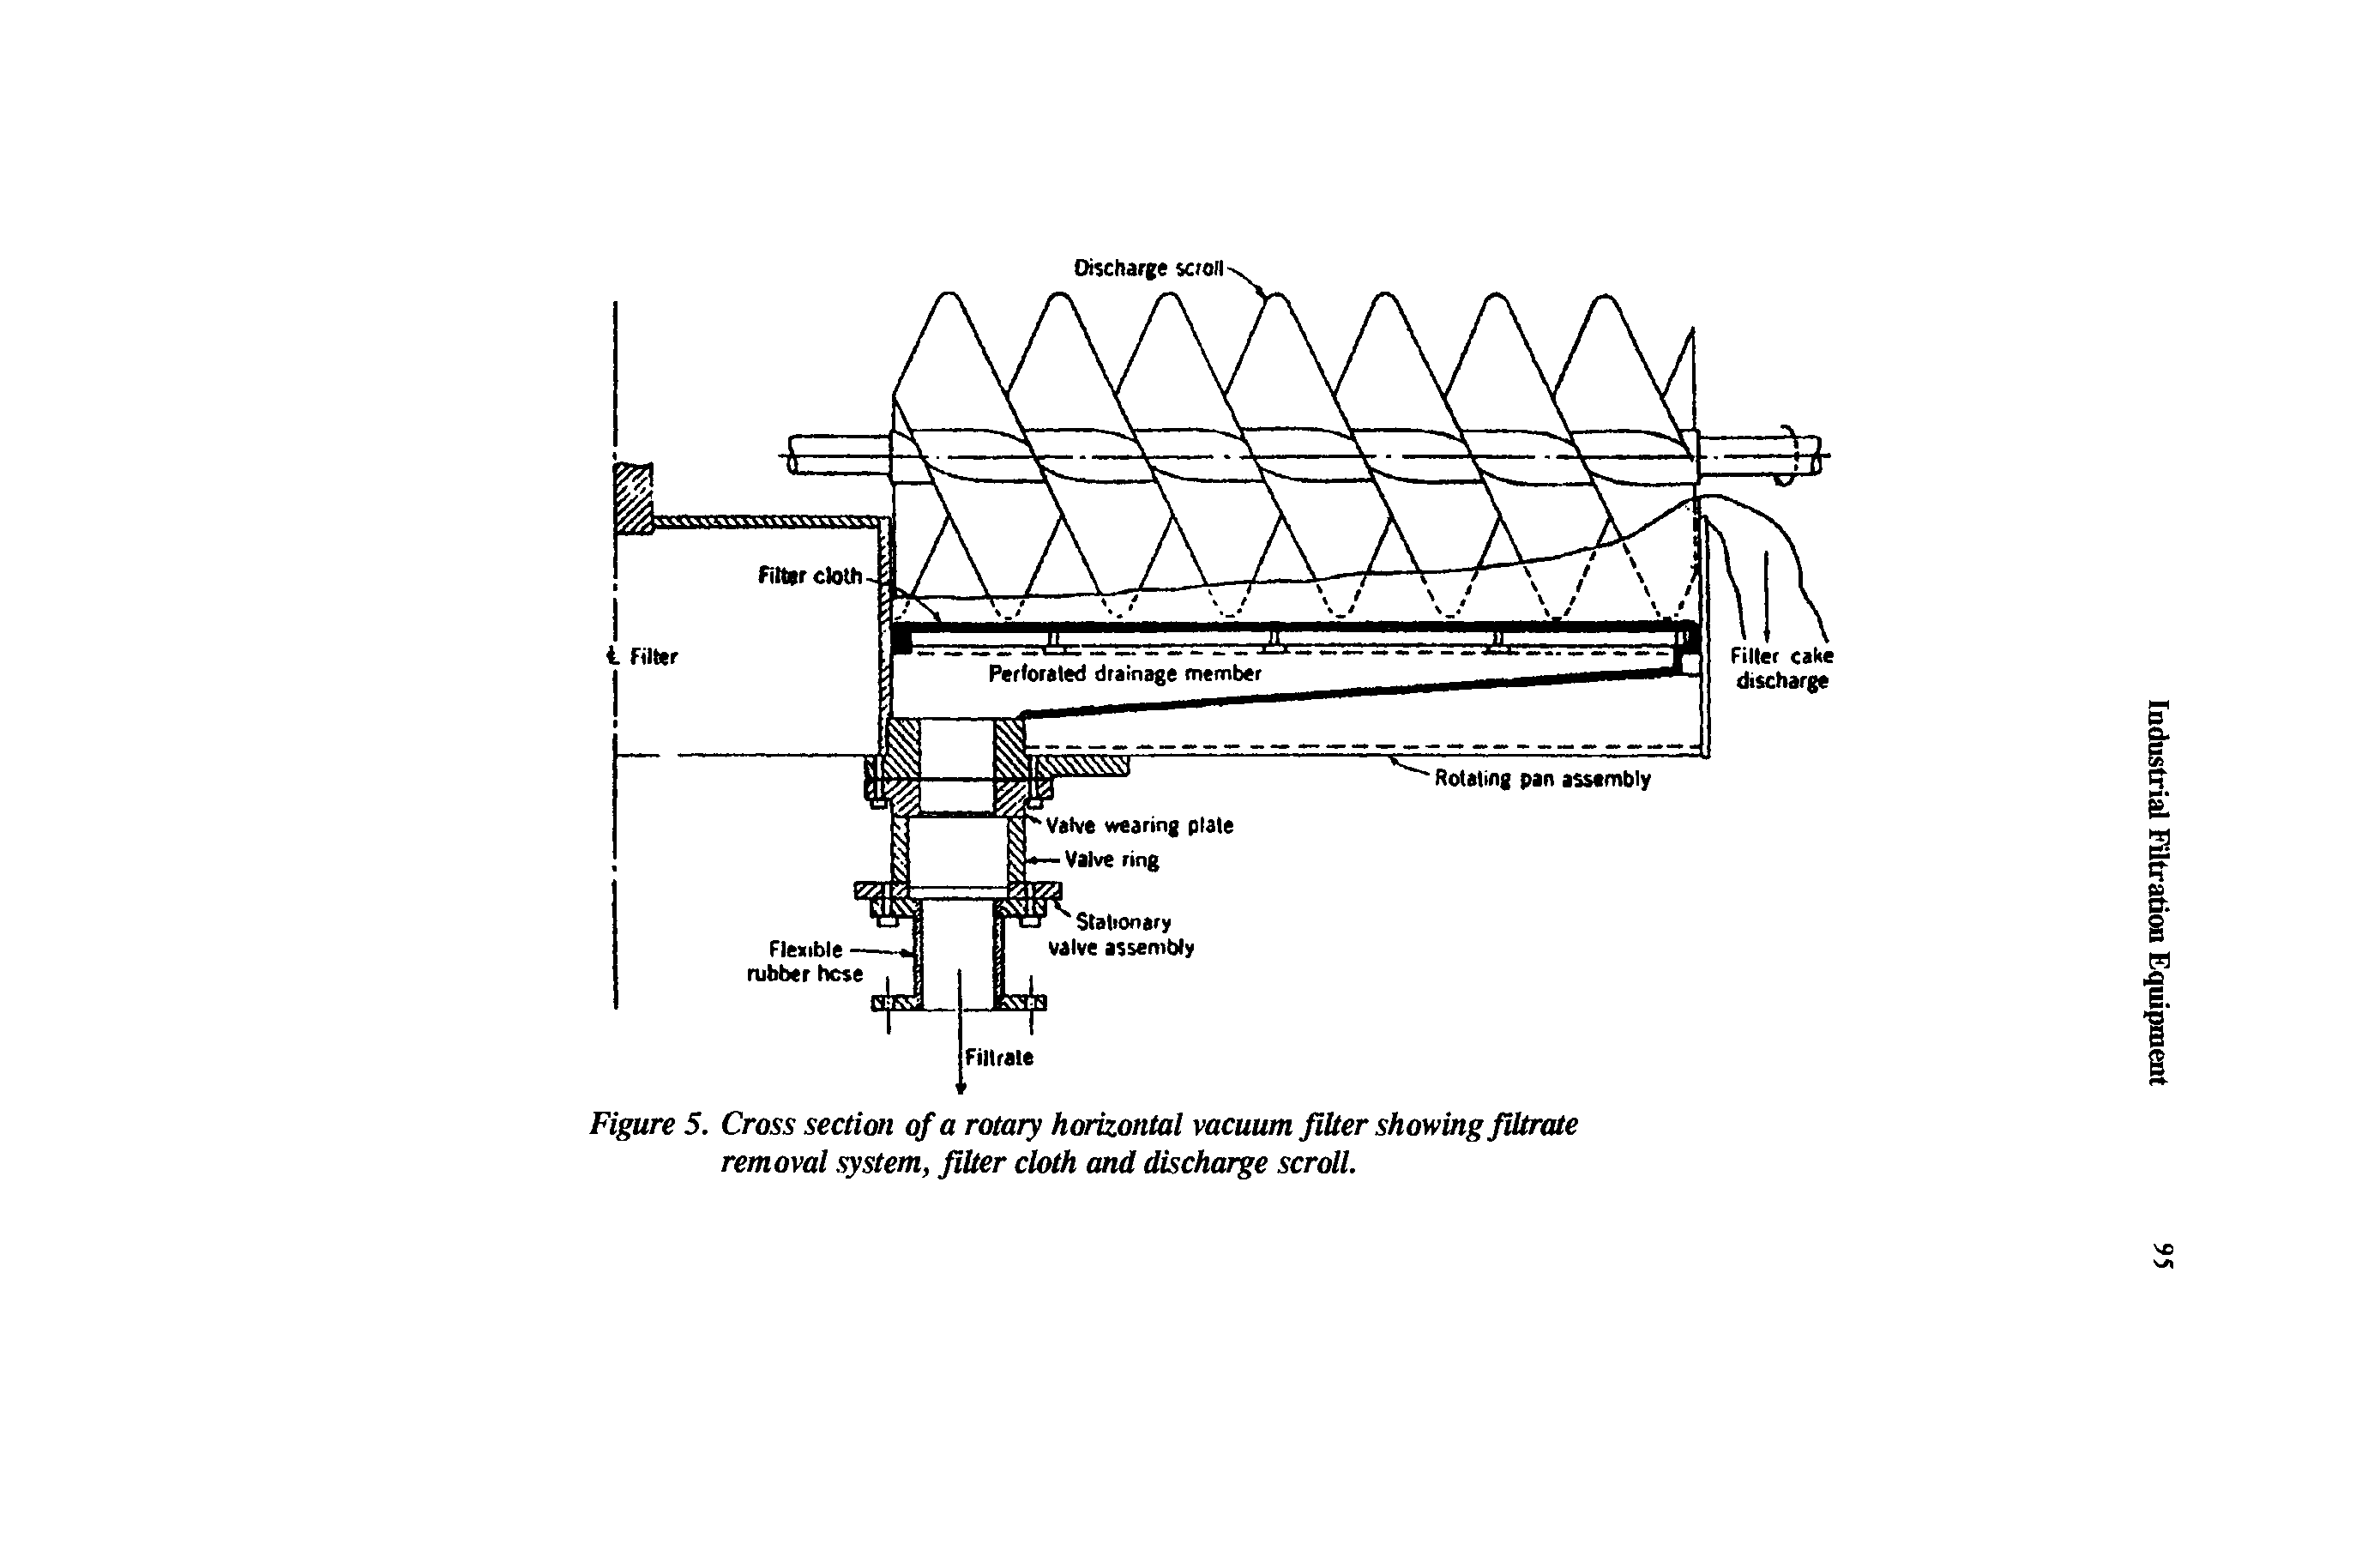 Figure 5. Cross section of a rotary horizontal vacuum filter showing filtrate removal system, filter cloth and discharge scroll.